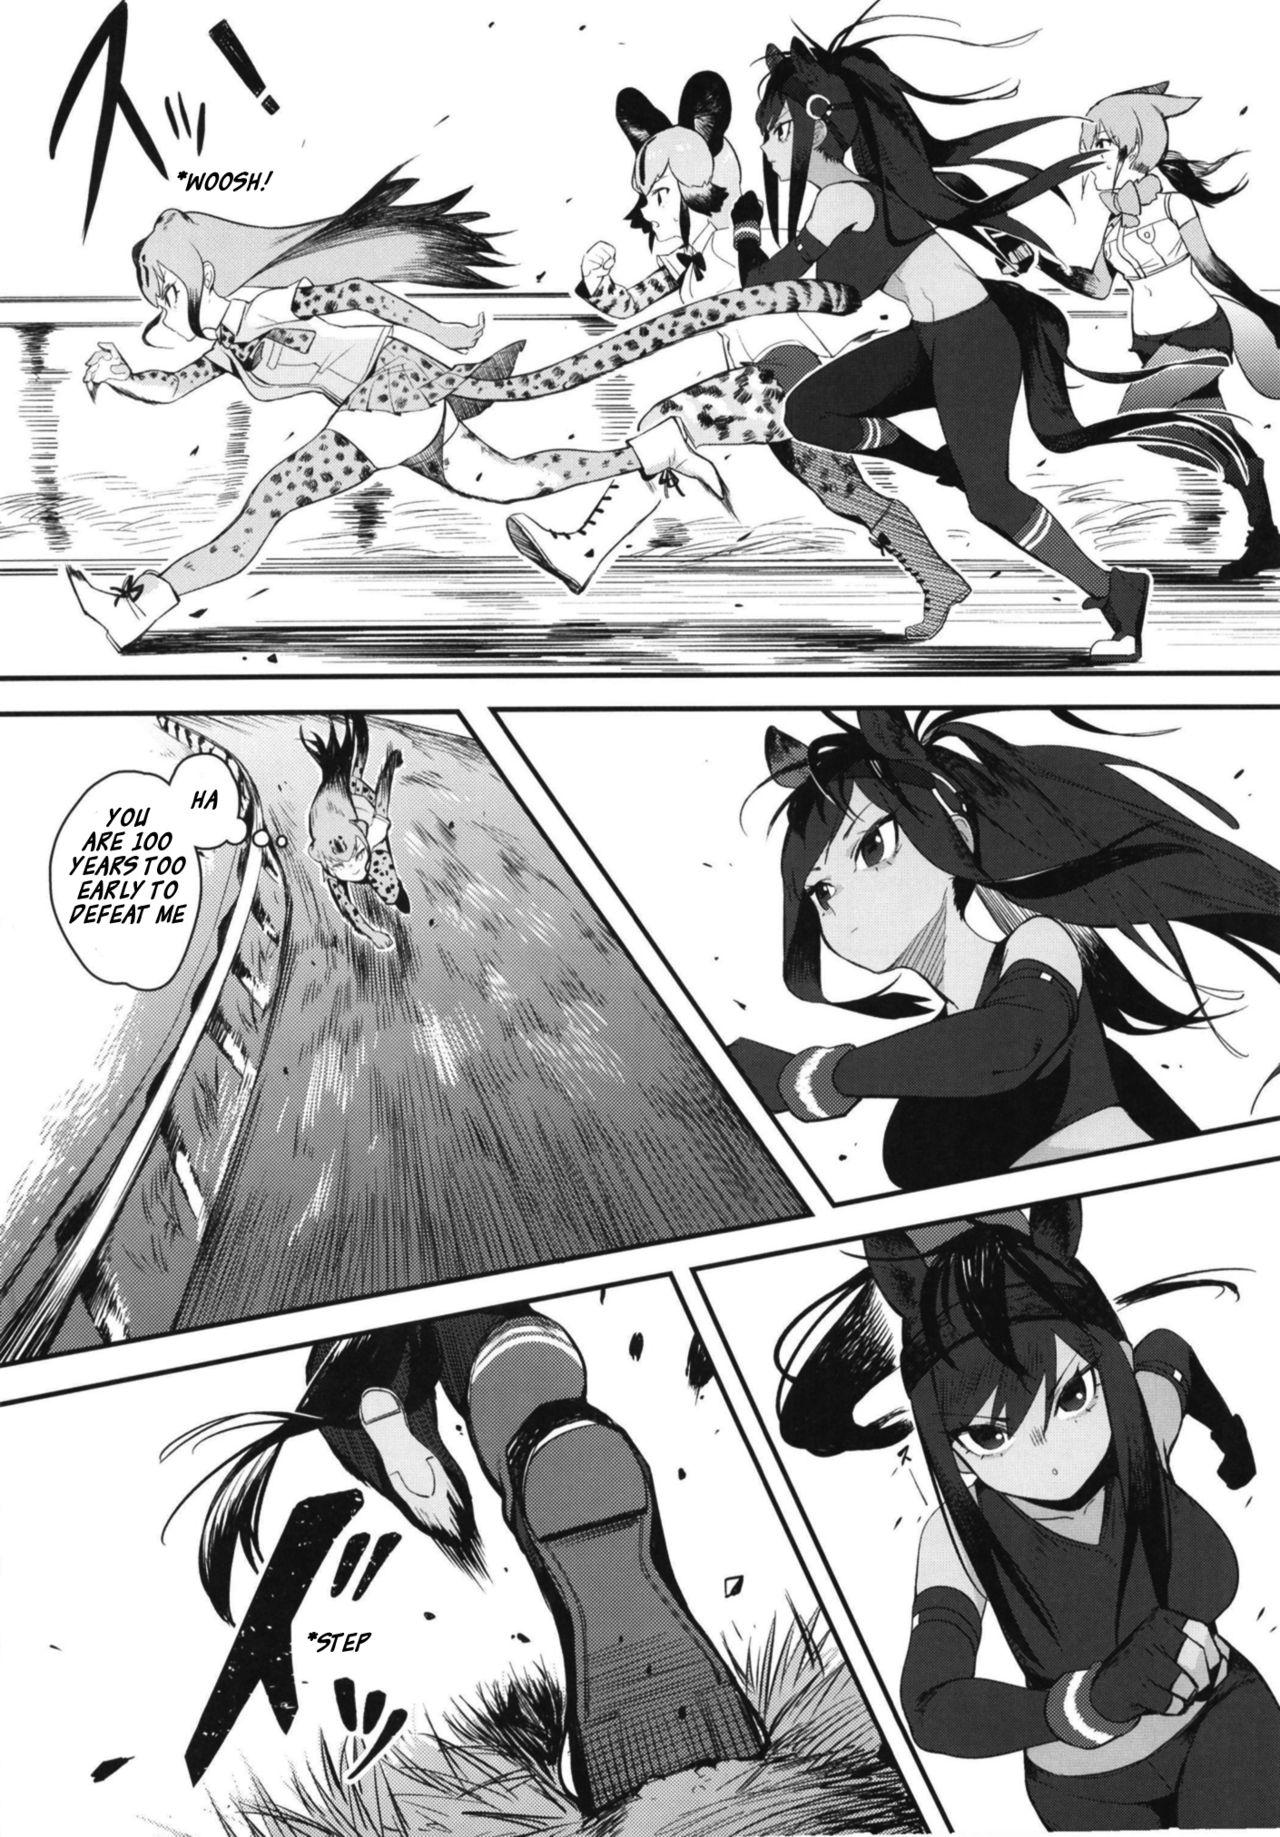 Pica Thoroughbred Early Days 2 - Kemono friends Tinder - Page 4